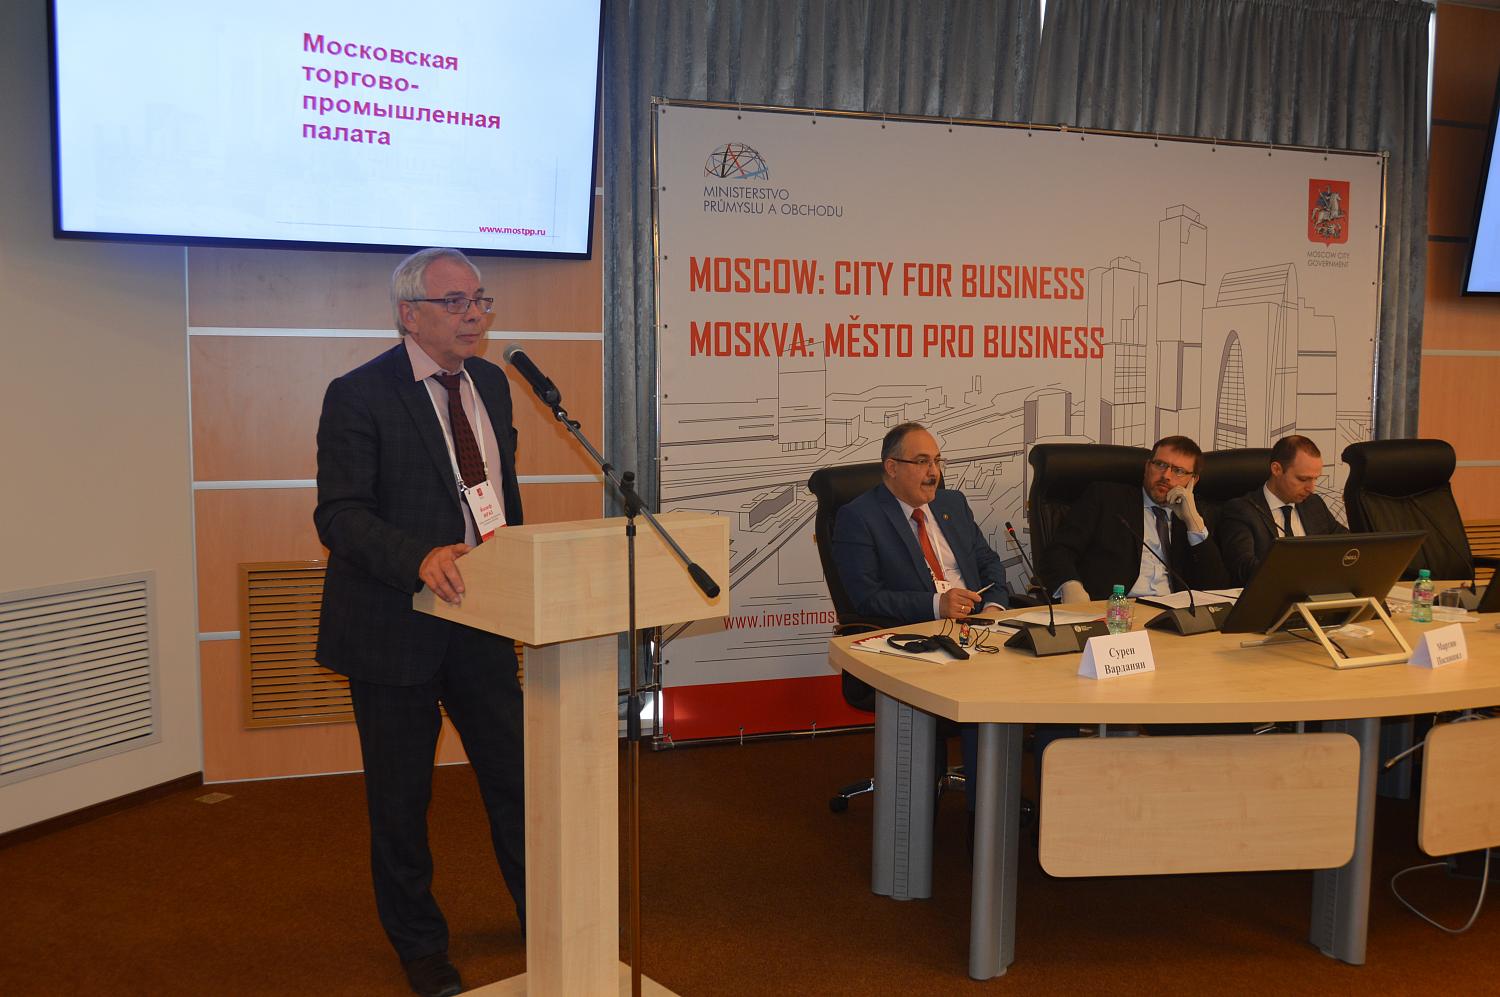 Representatives of Russian and Czech businesses discussed the prospects for mutually beneficial cooperation